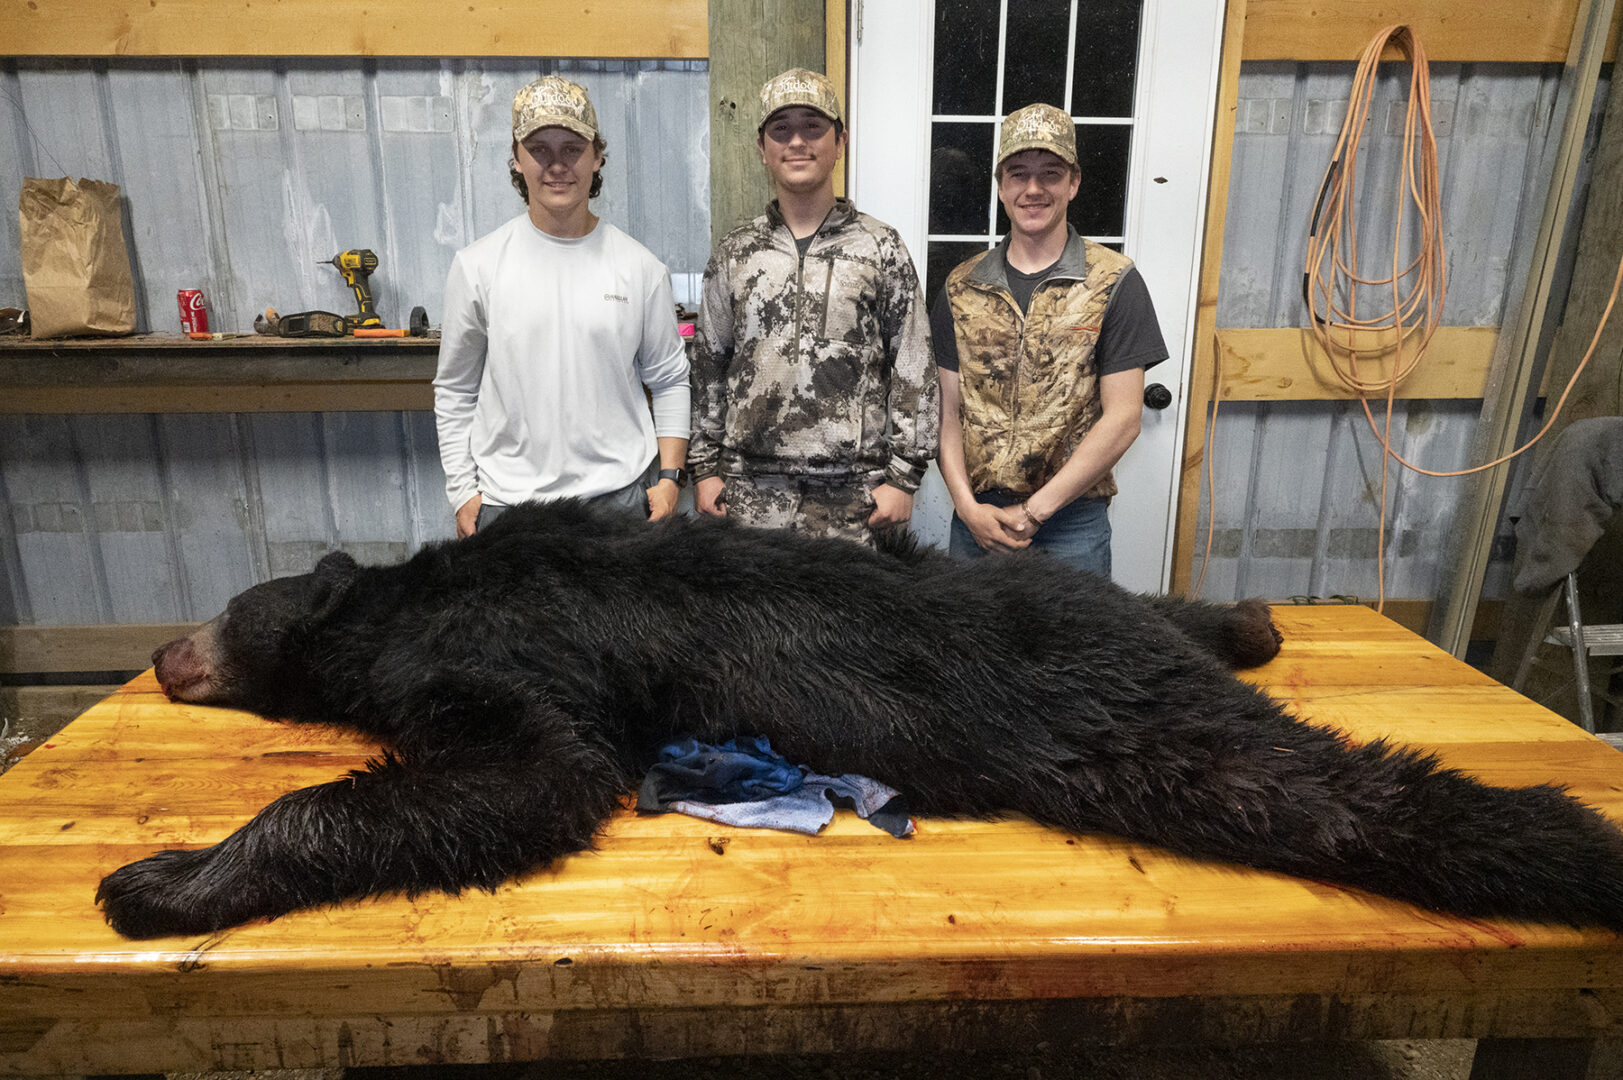 Three young men standing next to a black bear.